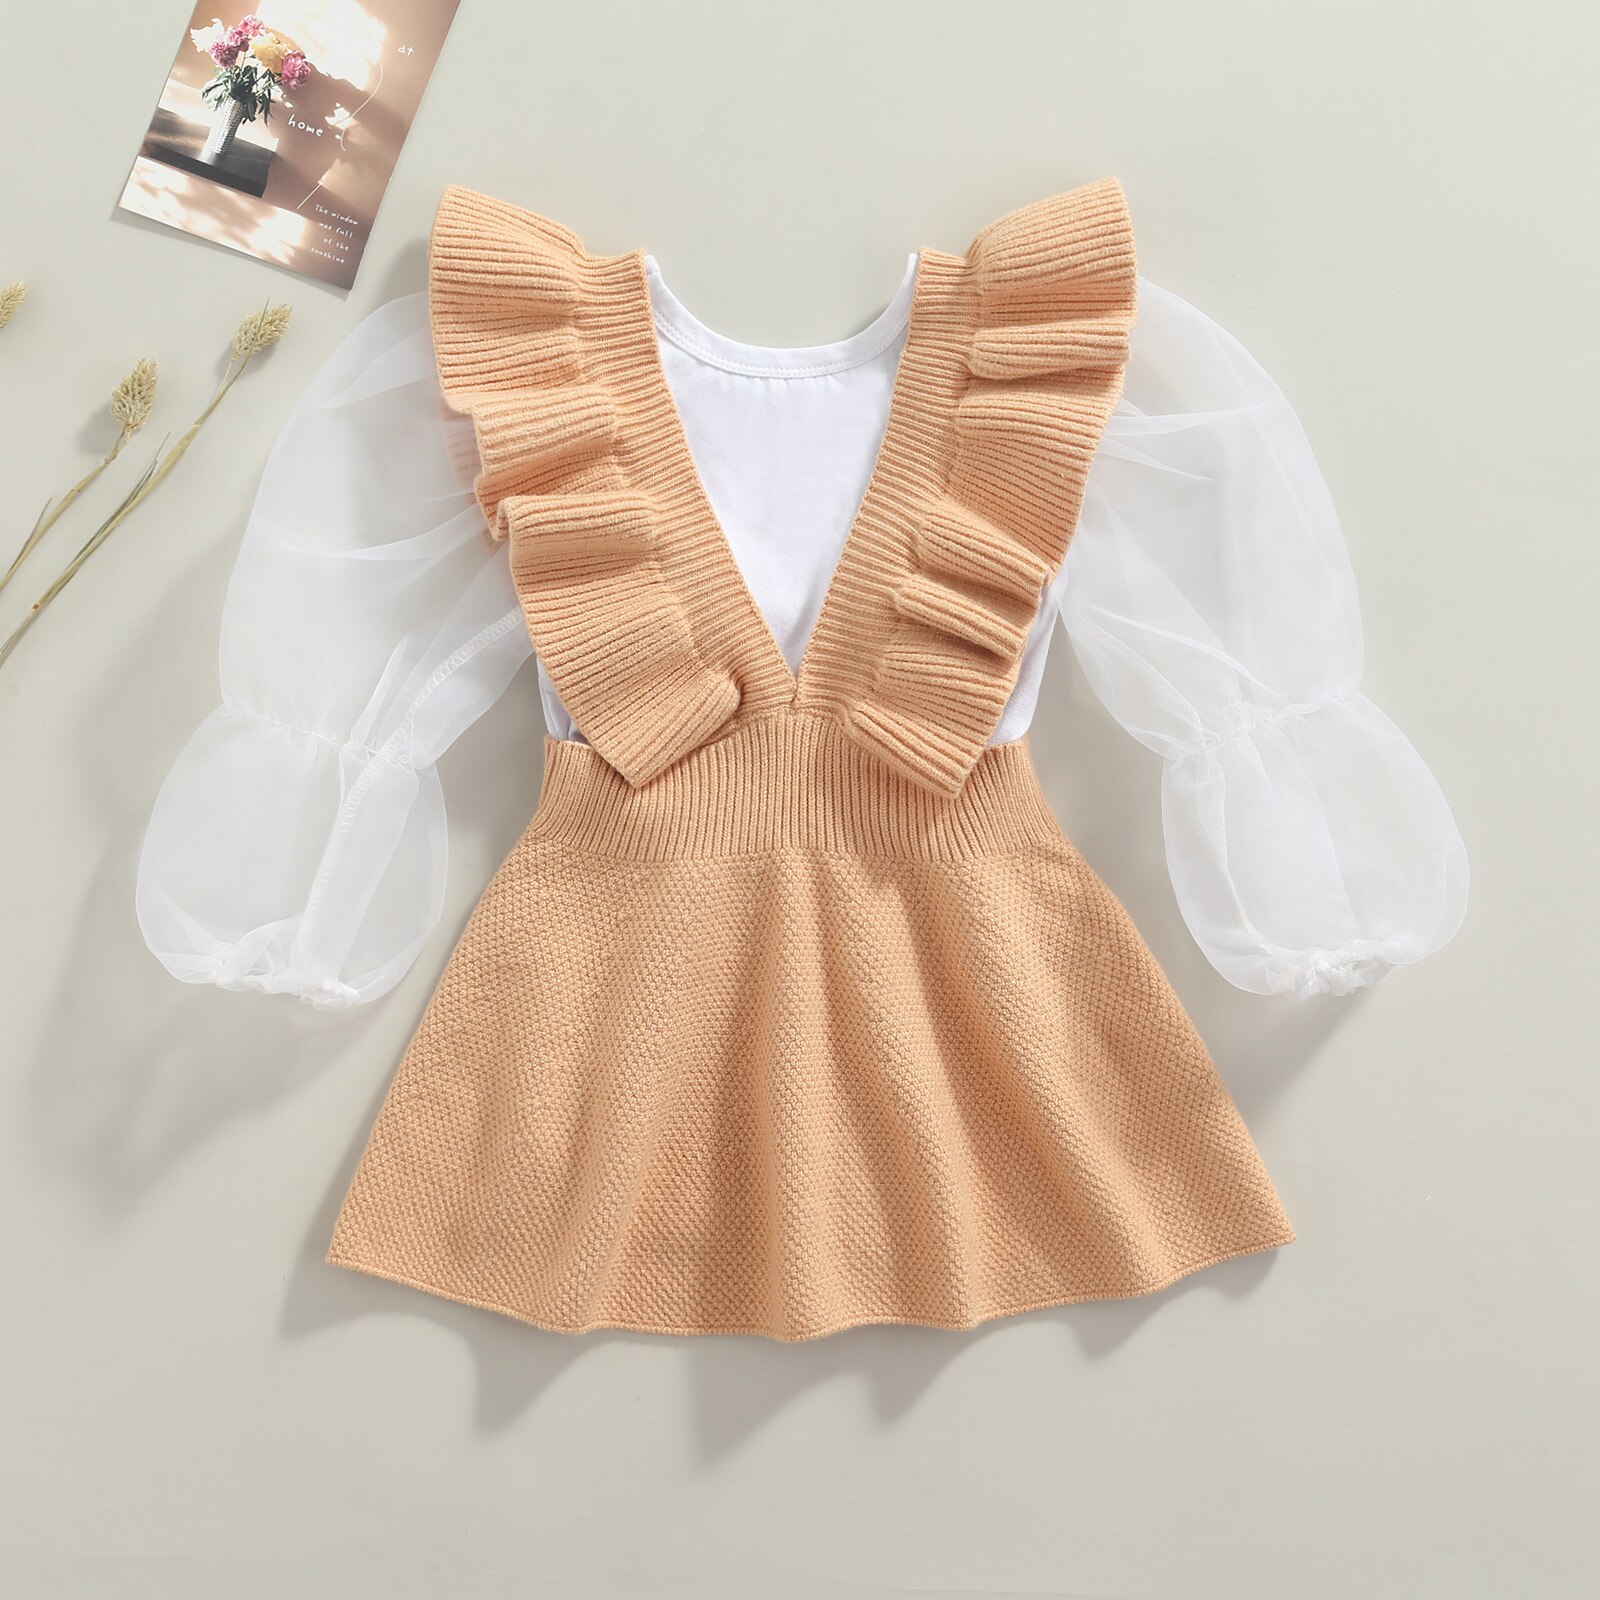 1-7Y-Fashion-Kids-Baby-Girls-Clothes-Sets-Puff-Sleeve-Solid-Pullovers-Tops-Knitted-Suspender-Skirt-5